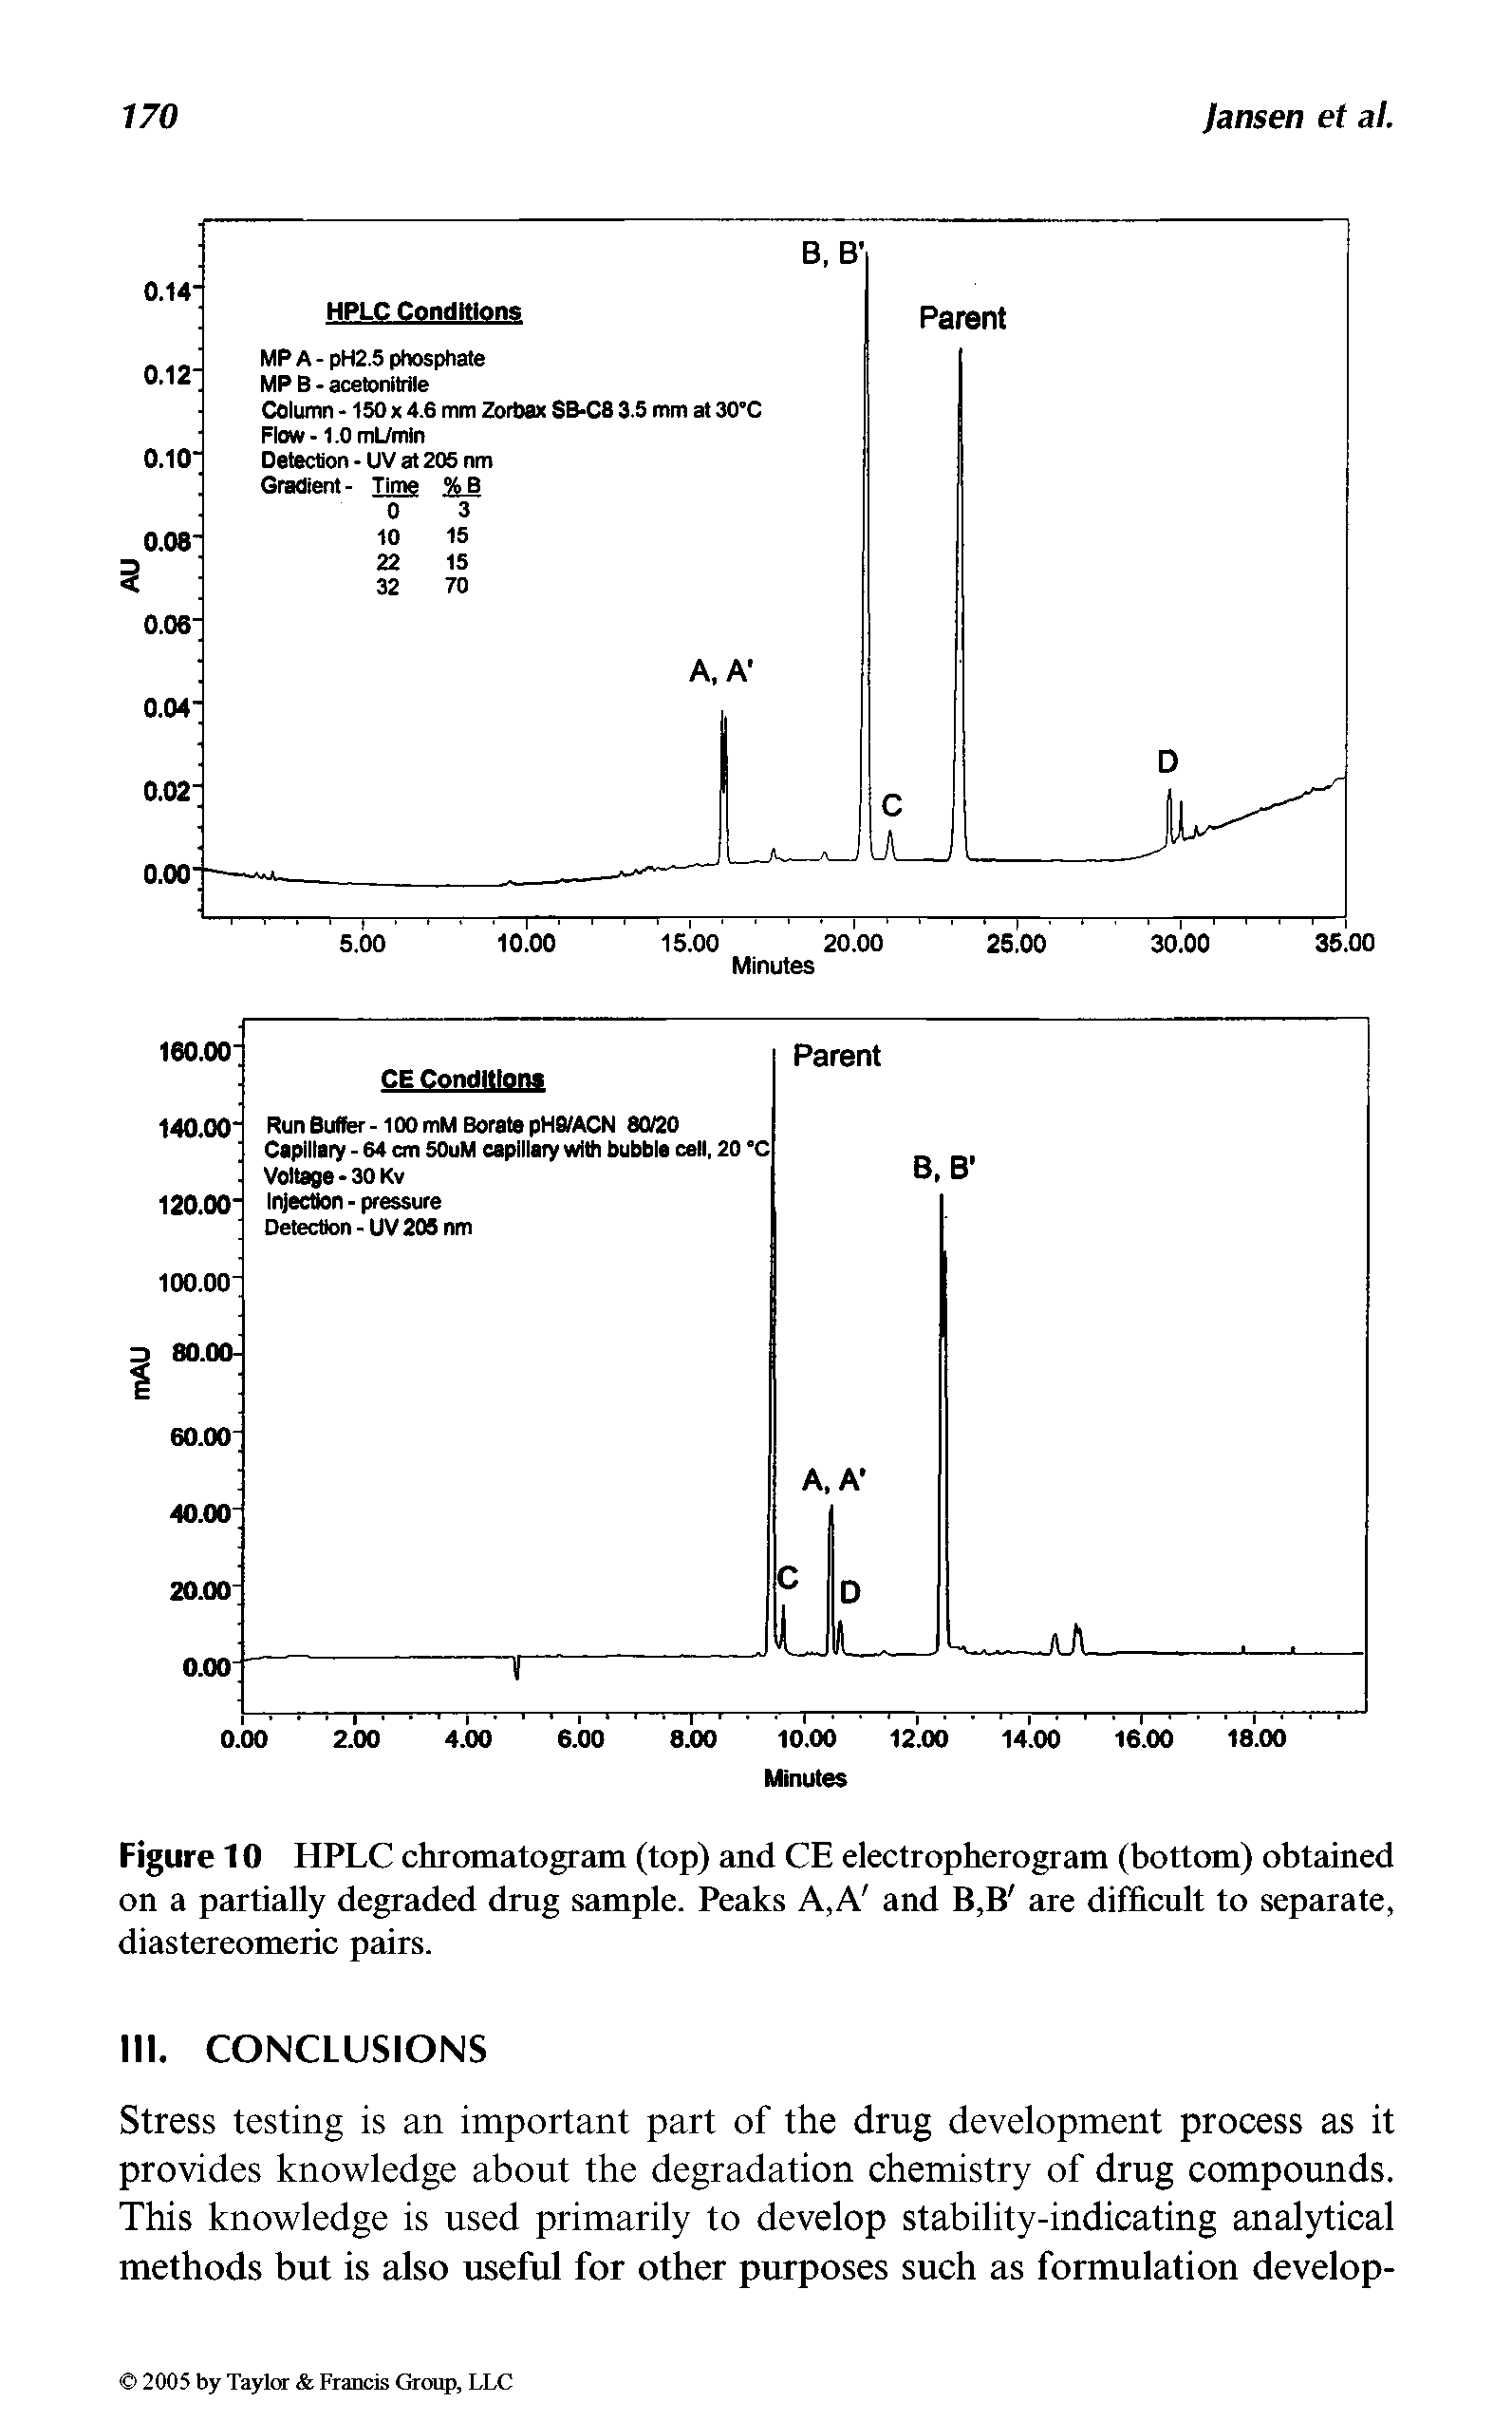 Figure 10 HPLC chromatogram (top) and CE electropherogram (bottom) obtained on a partially degraded drug sample. Peaks A,A and B,B are difficult to separate, diastereomeric pairs.